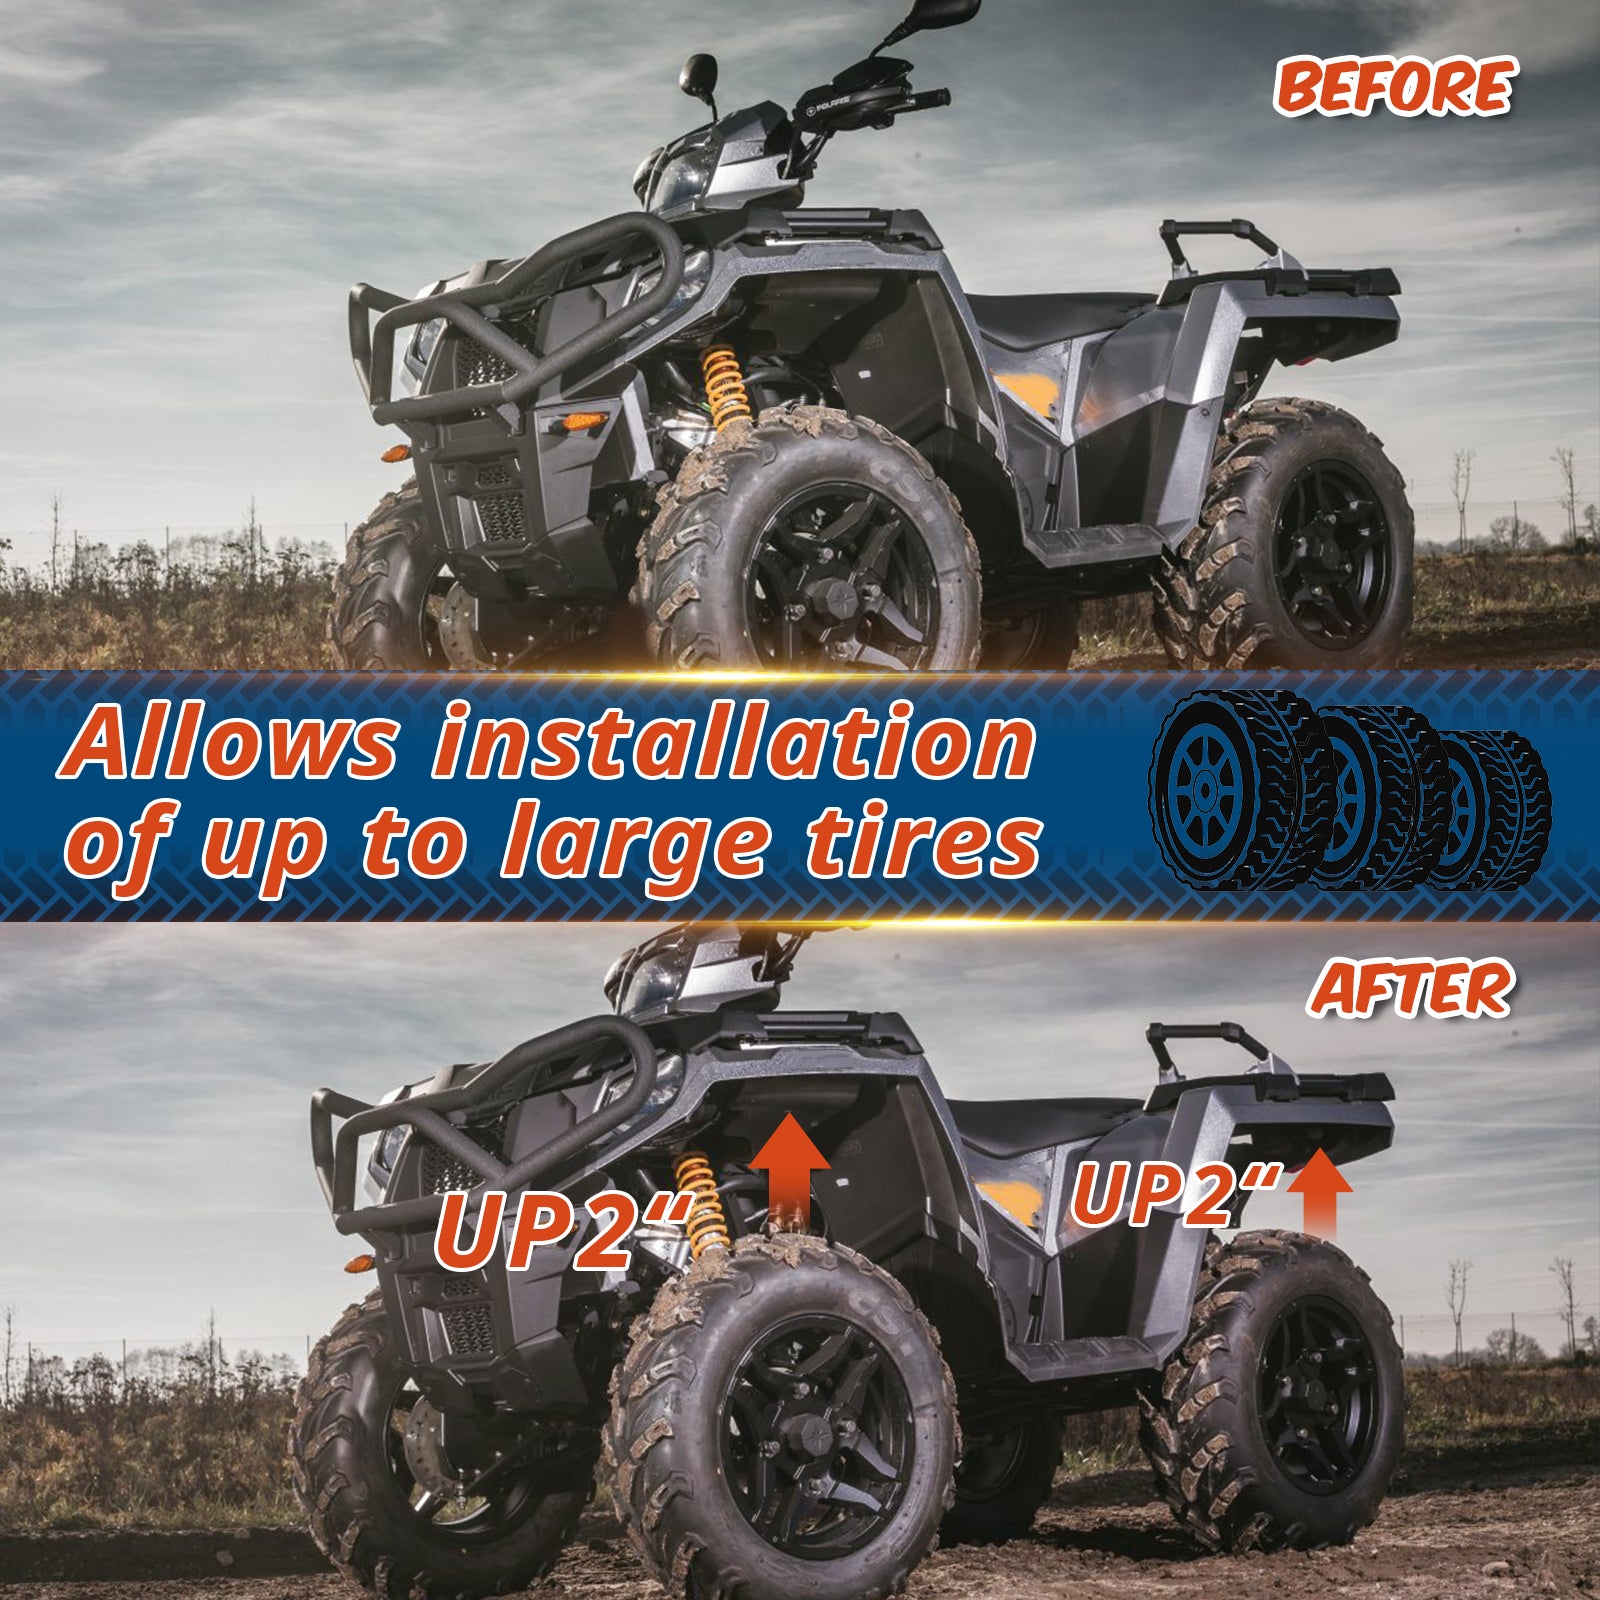 For 1999-2021 Polaris Sportsman 2 inches front and rear ATV/UTV  Suspenison Kits Accessories xccscss.